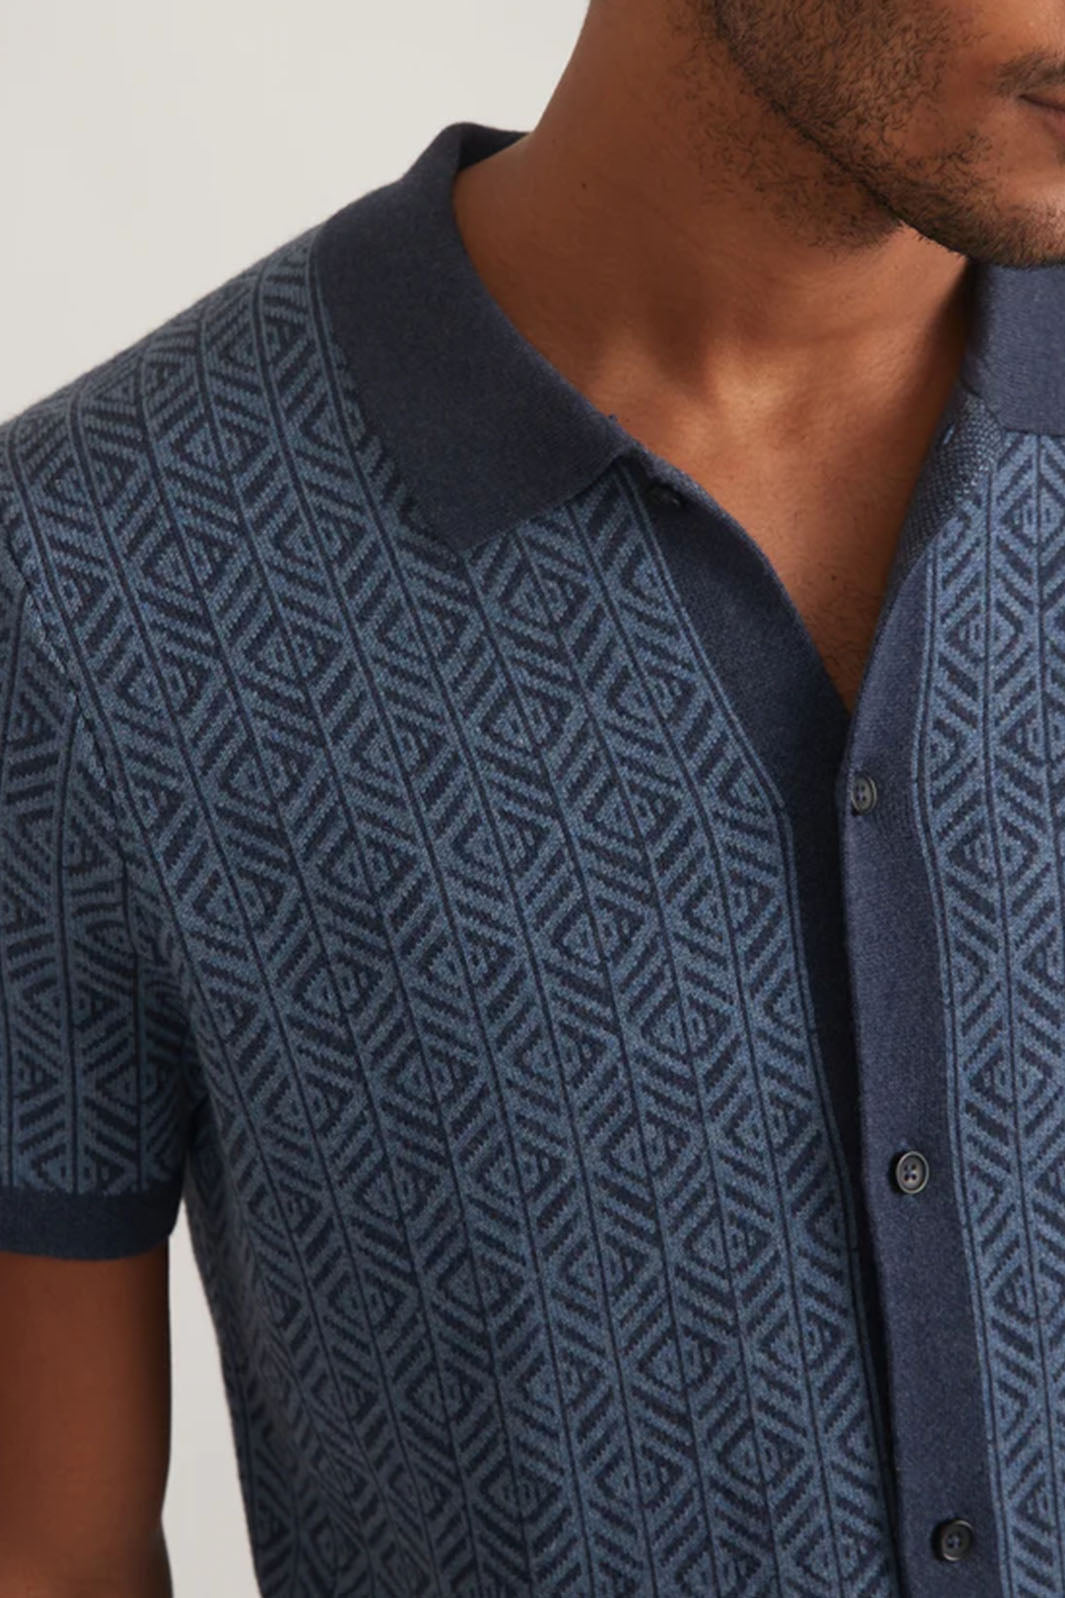 Ethan Button-Up Sweater - Blue Geo Jacquard